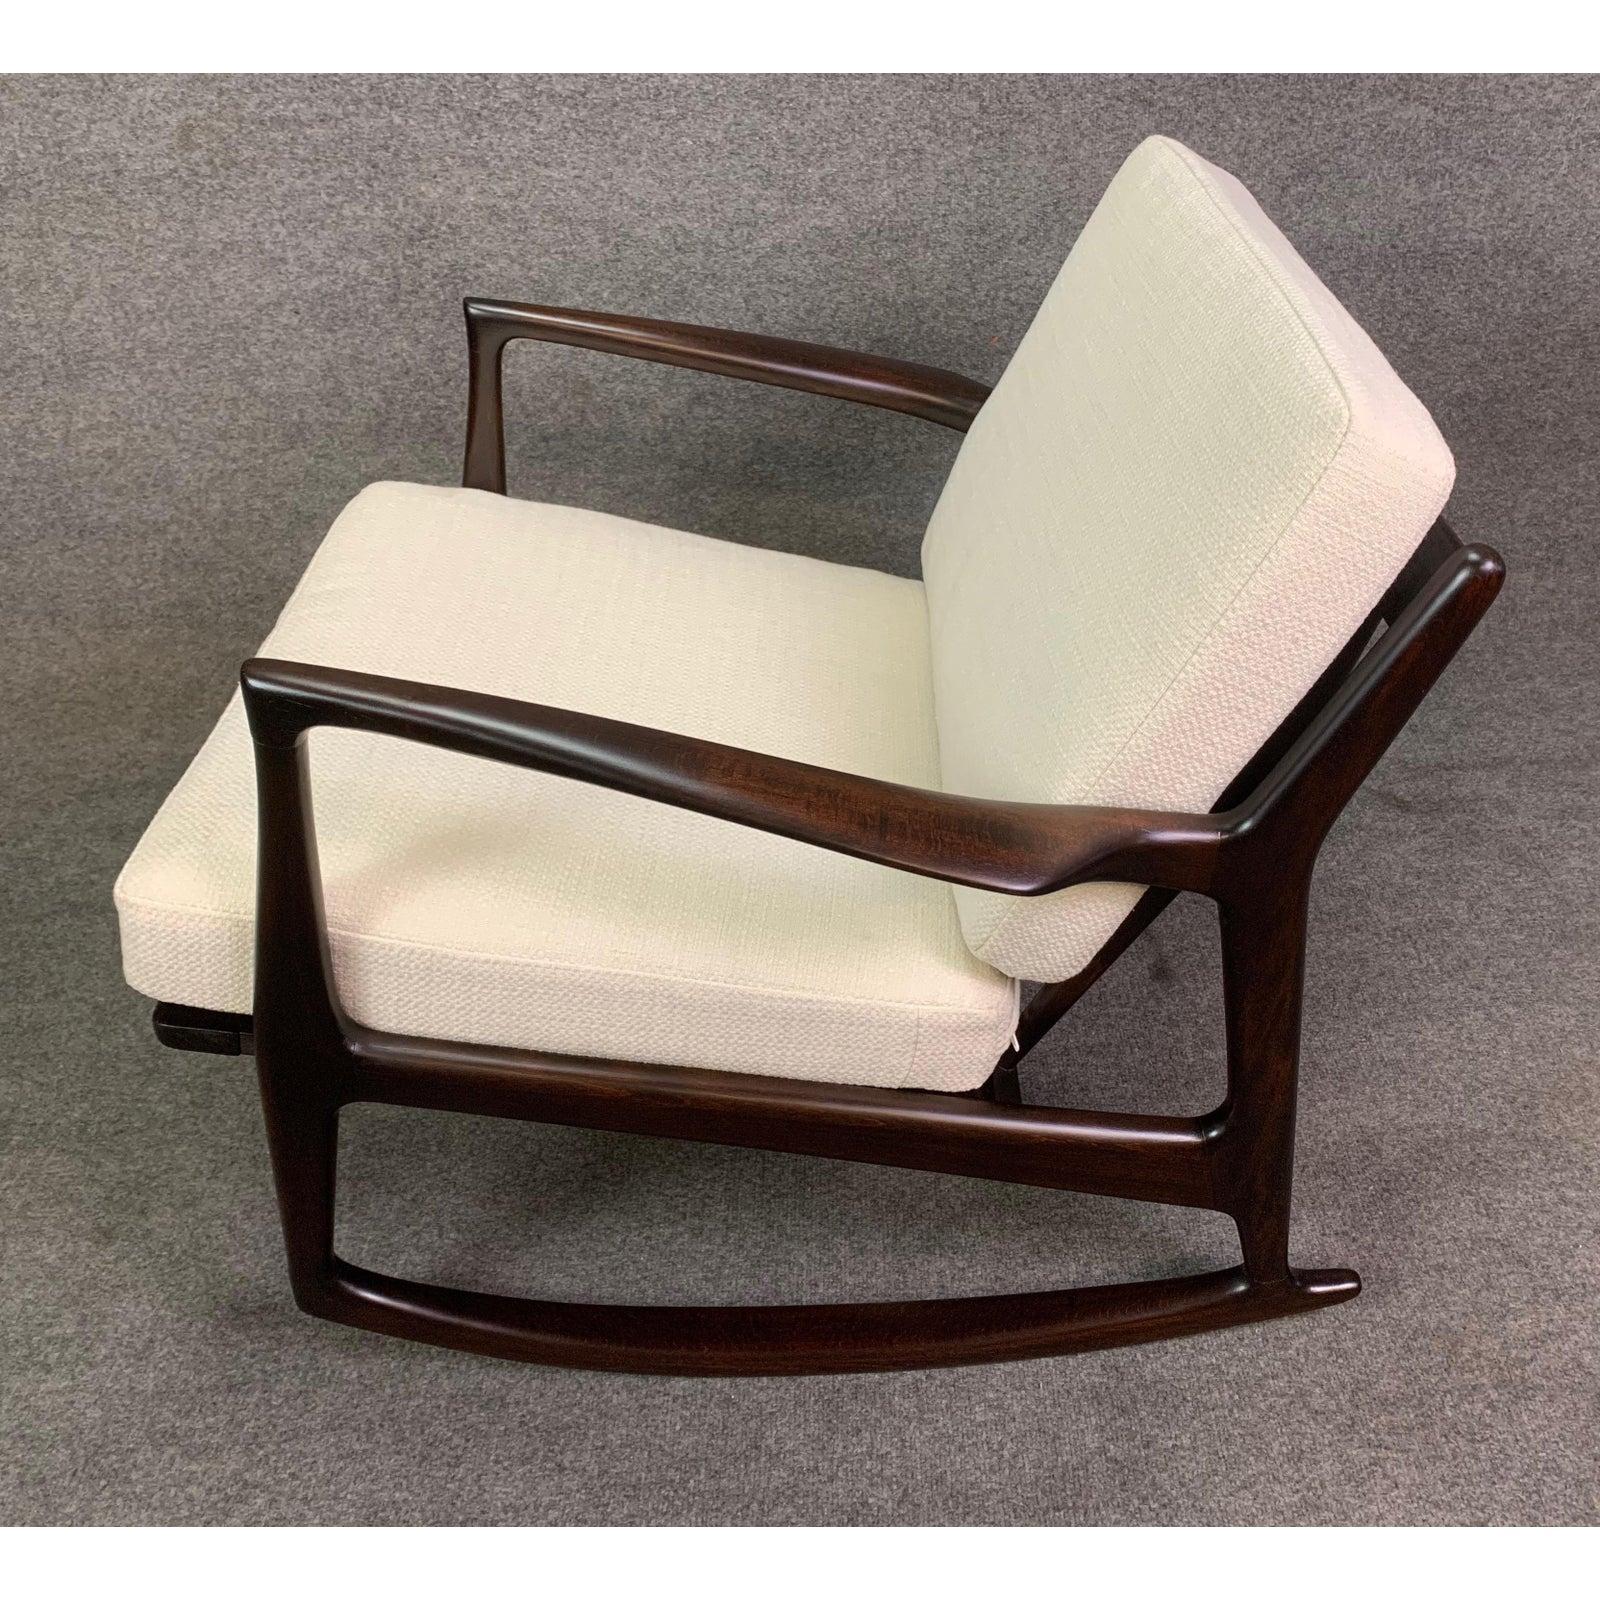 Wood Vintage Danish Mid-Century Modern Rocking Chair by Kofod Larsen for Selig For Sale